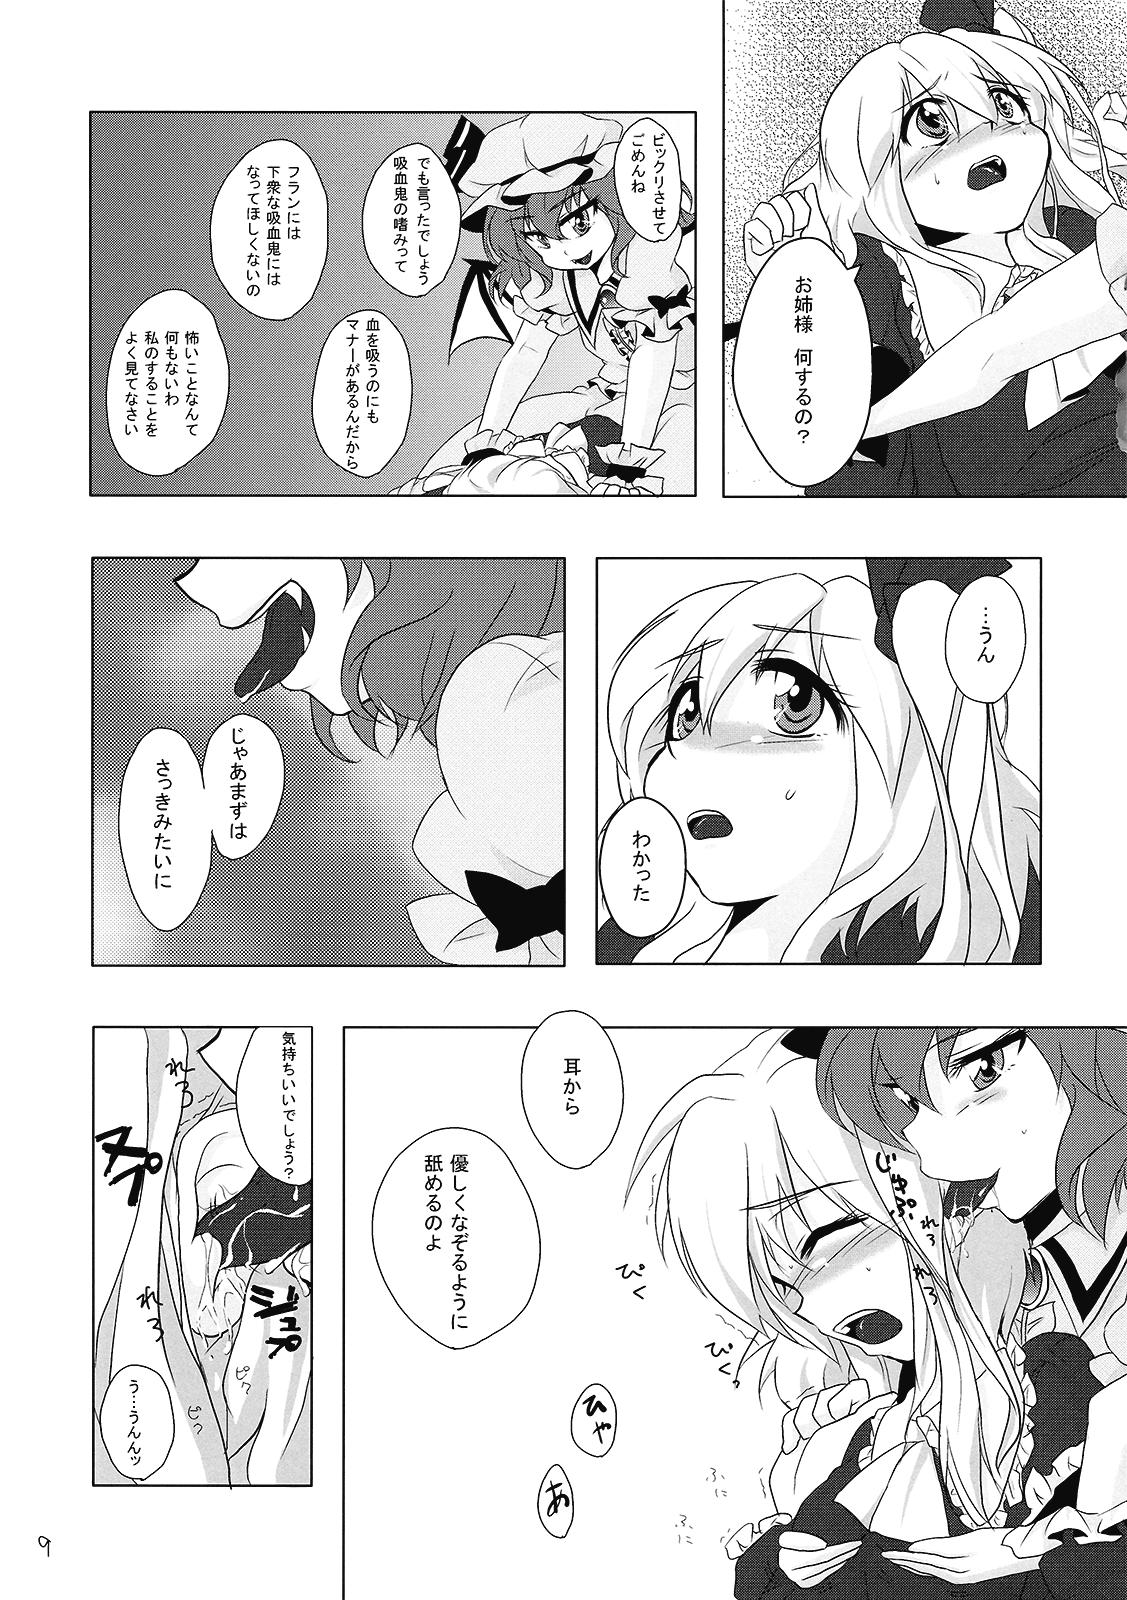 Facials 吸血鬼のすゝめ - Touhou project Porno - Page 11